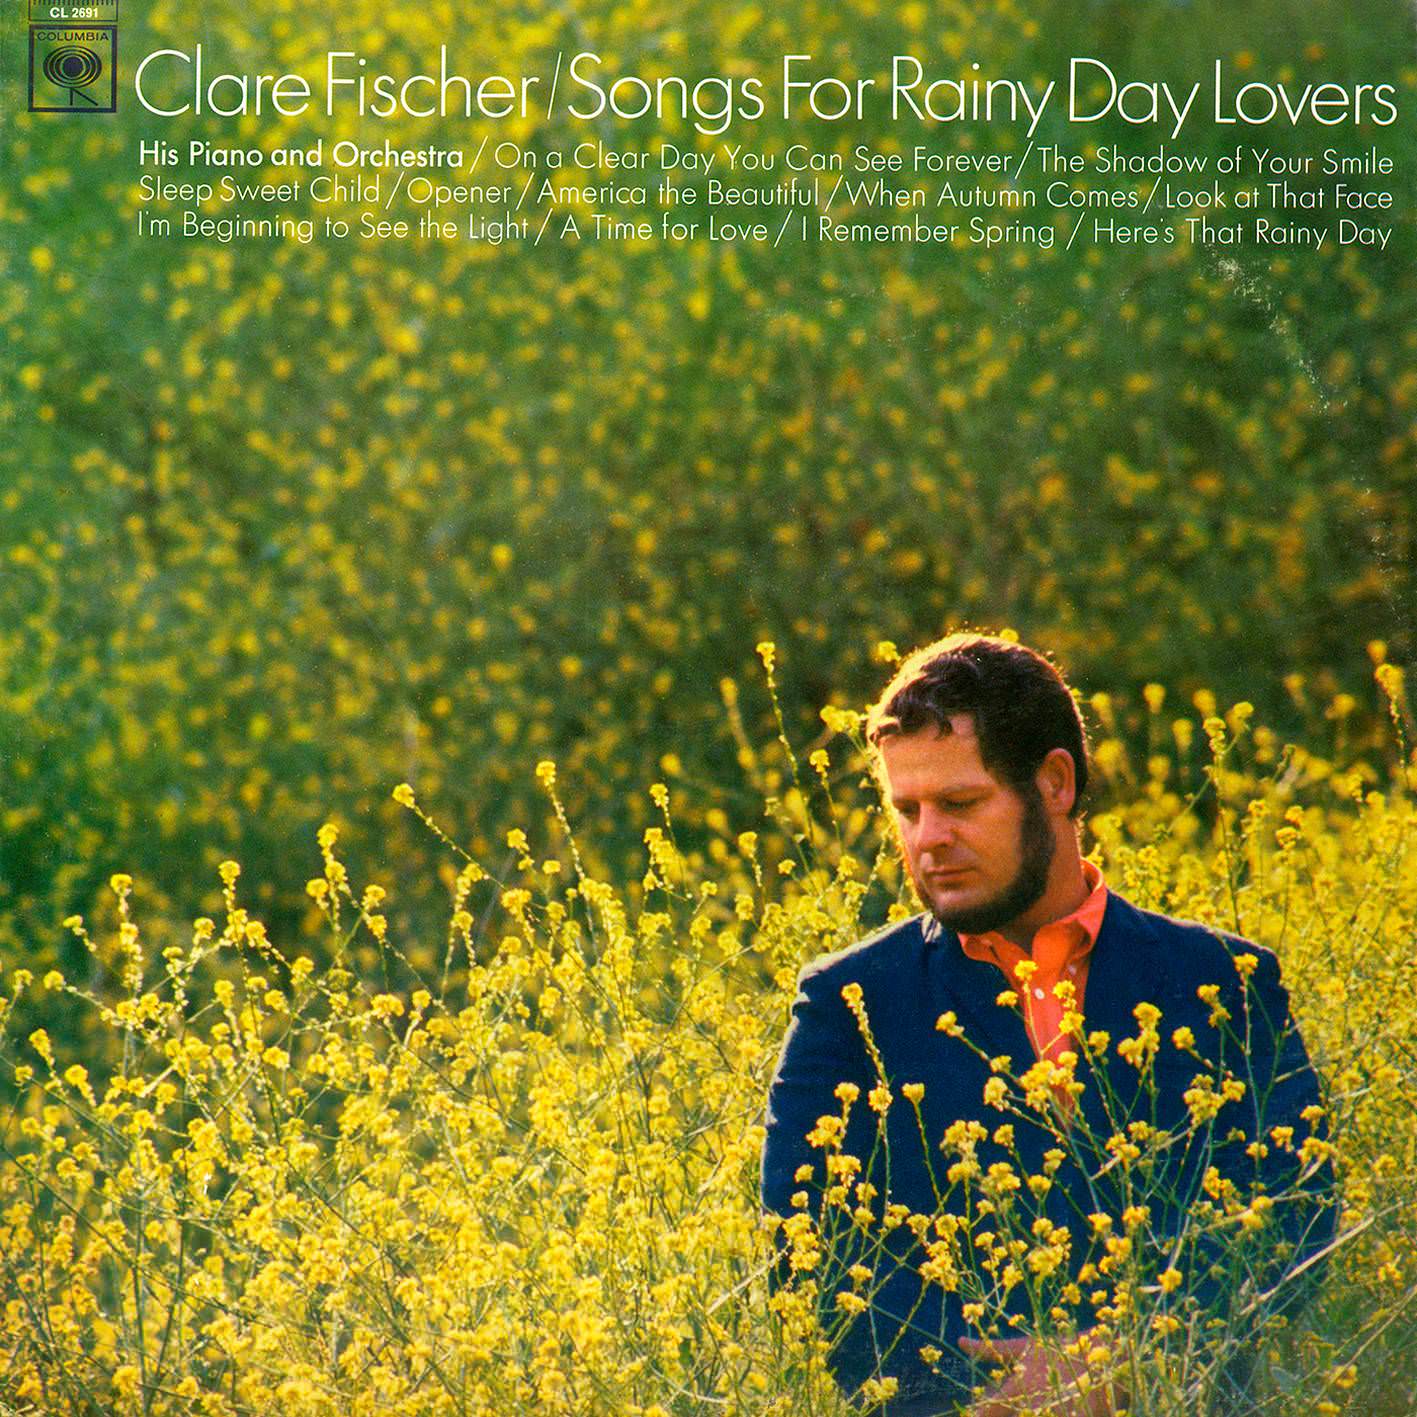 Clare Fischer – Songs For Rainy Day Lovers (1967/2018) [AcousticSounds FLAC 24bit/192kHz]